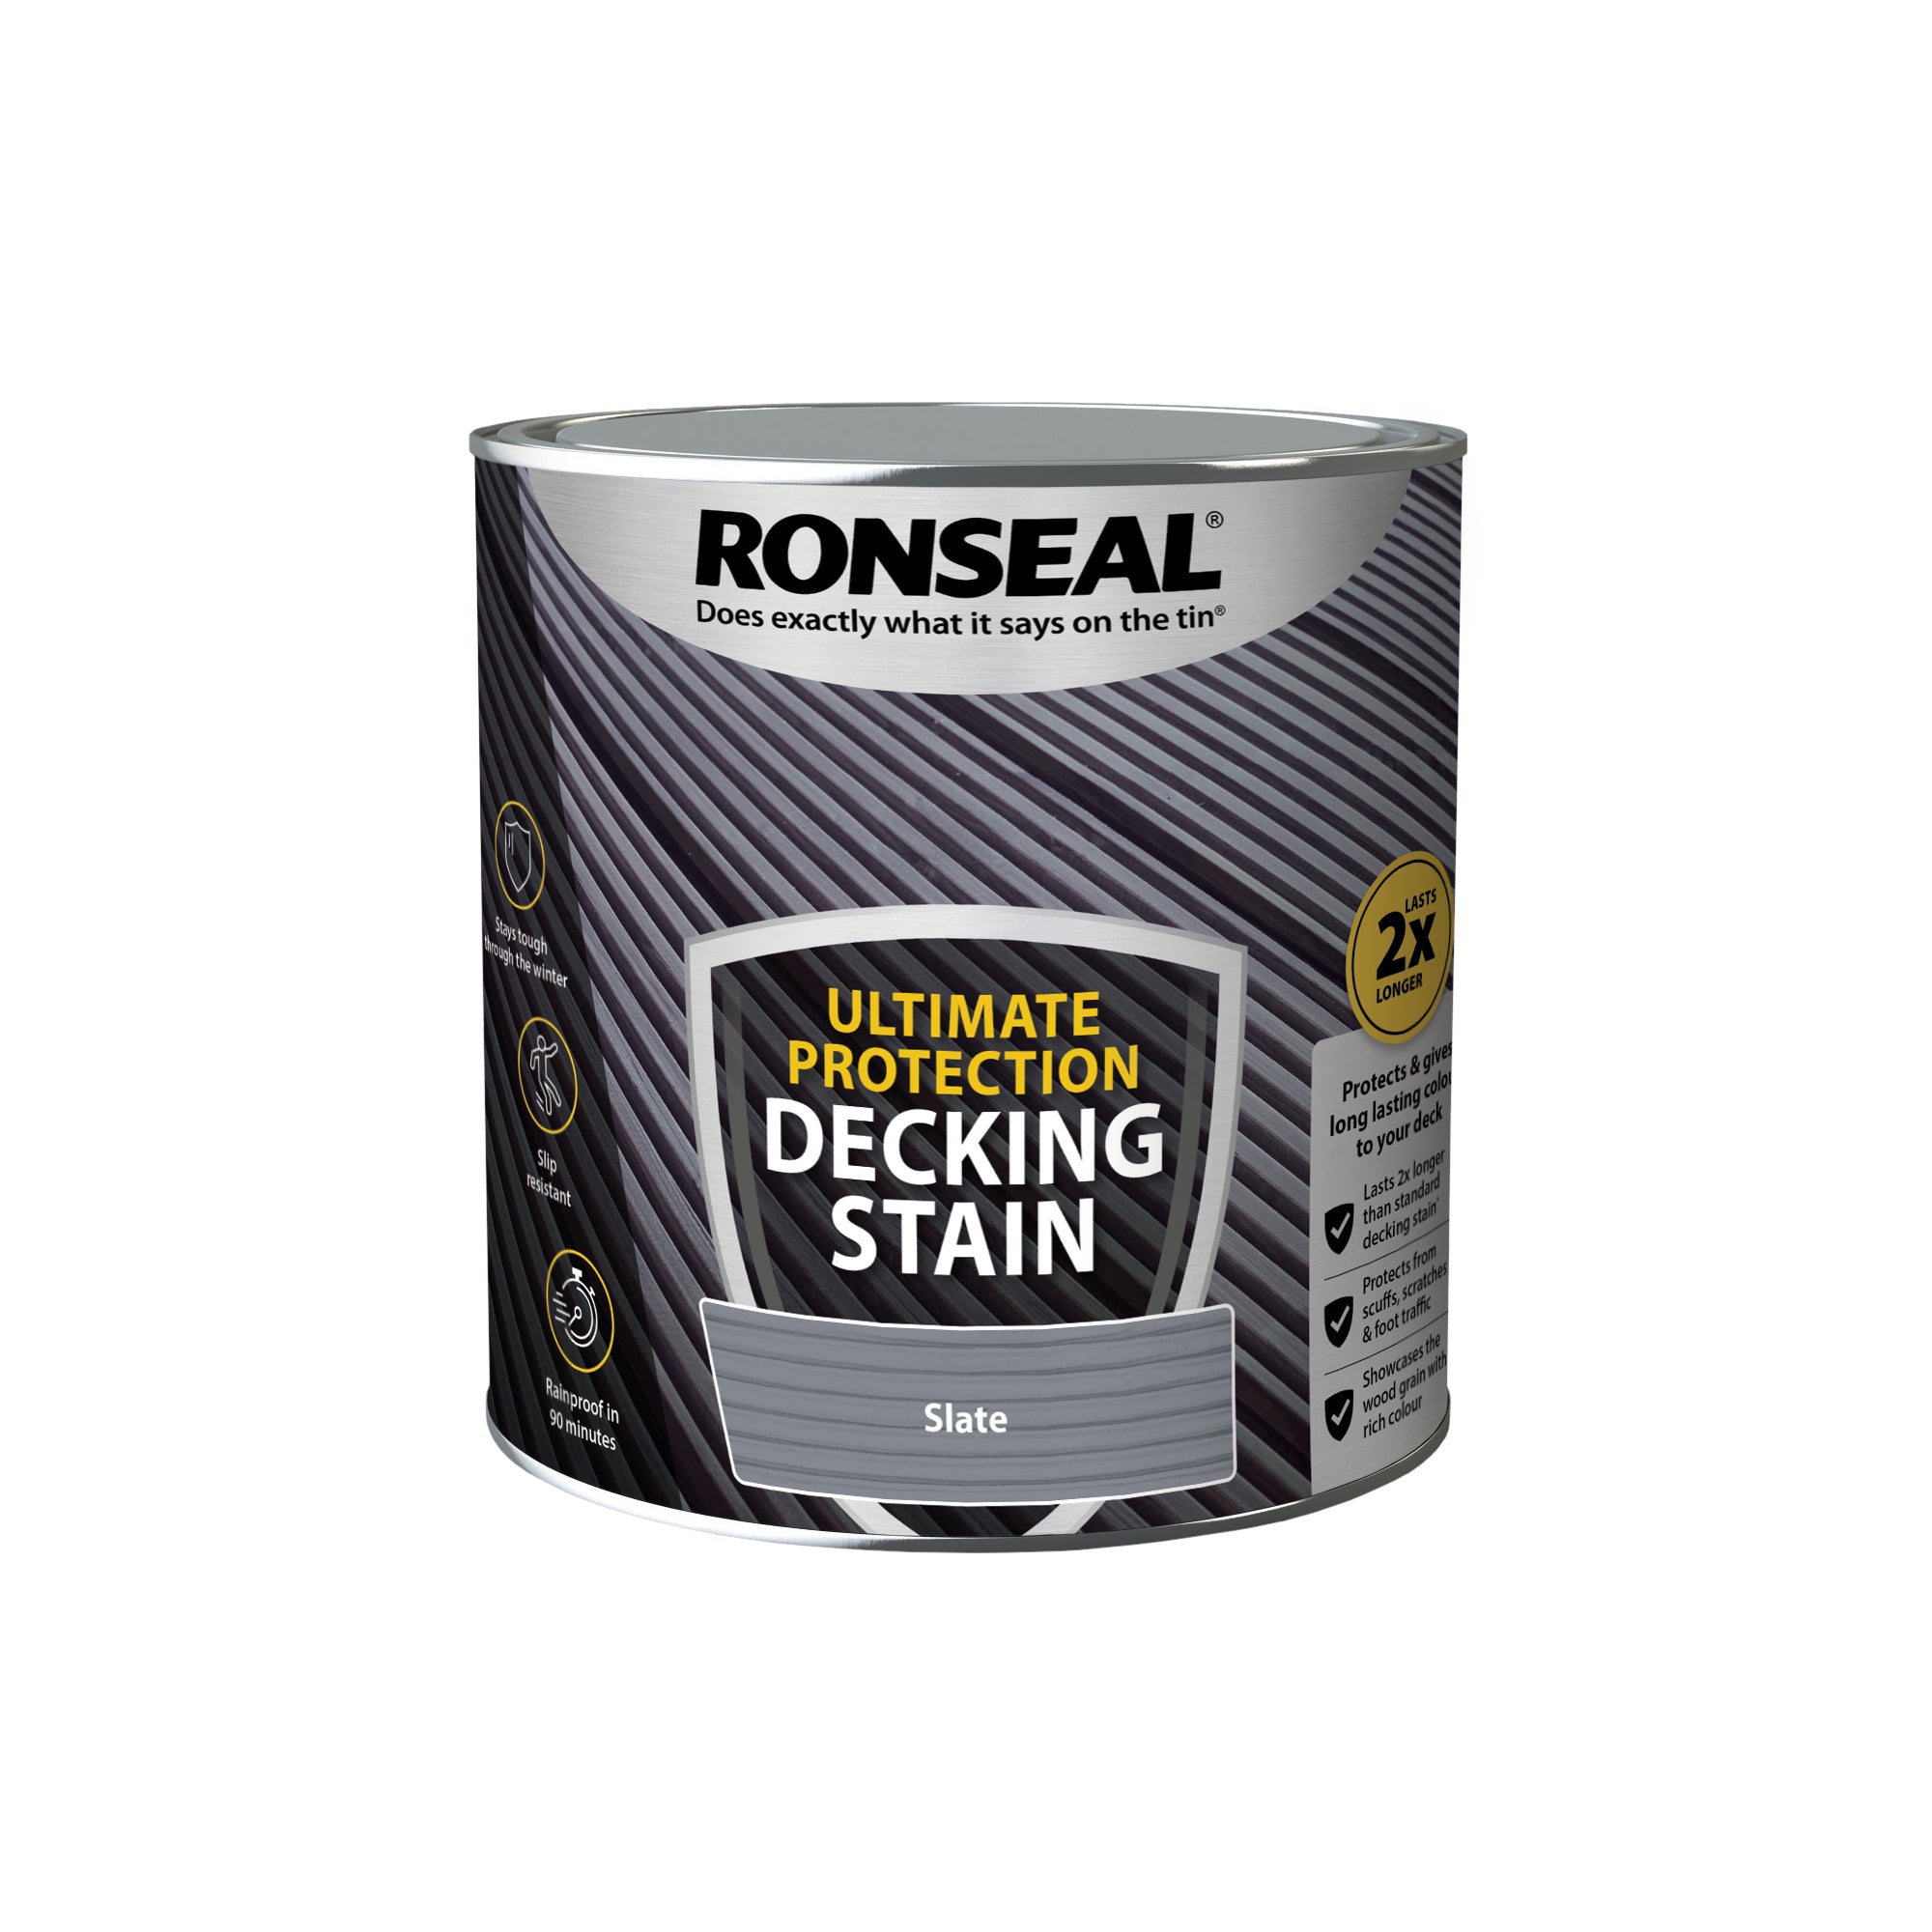 Ronseal-Ultimate-Protection-Decking-Stain-Slate-2.5L